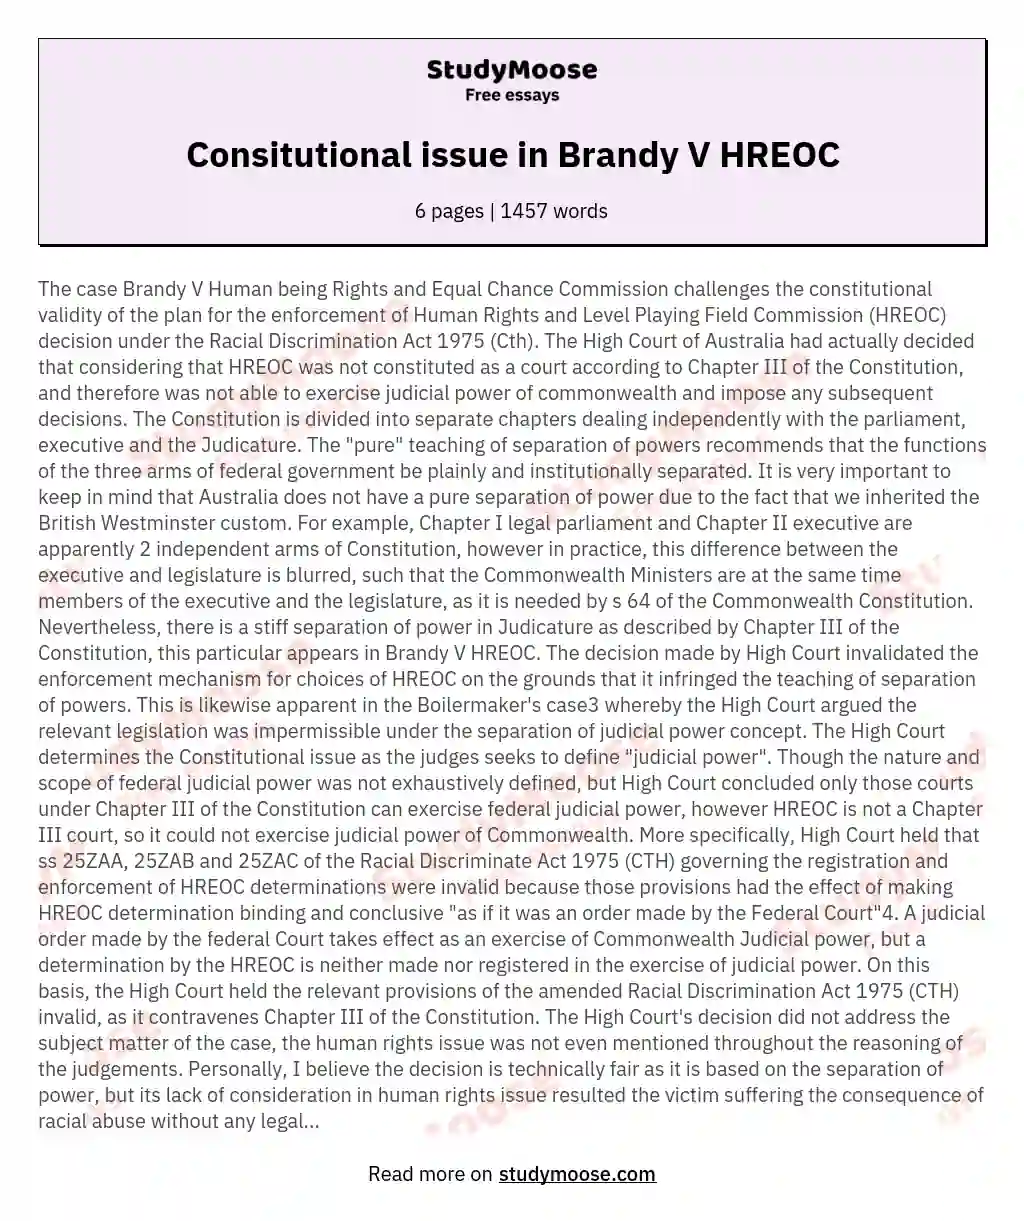 Consitutional issue in Brandy V HREOC essay